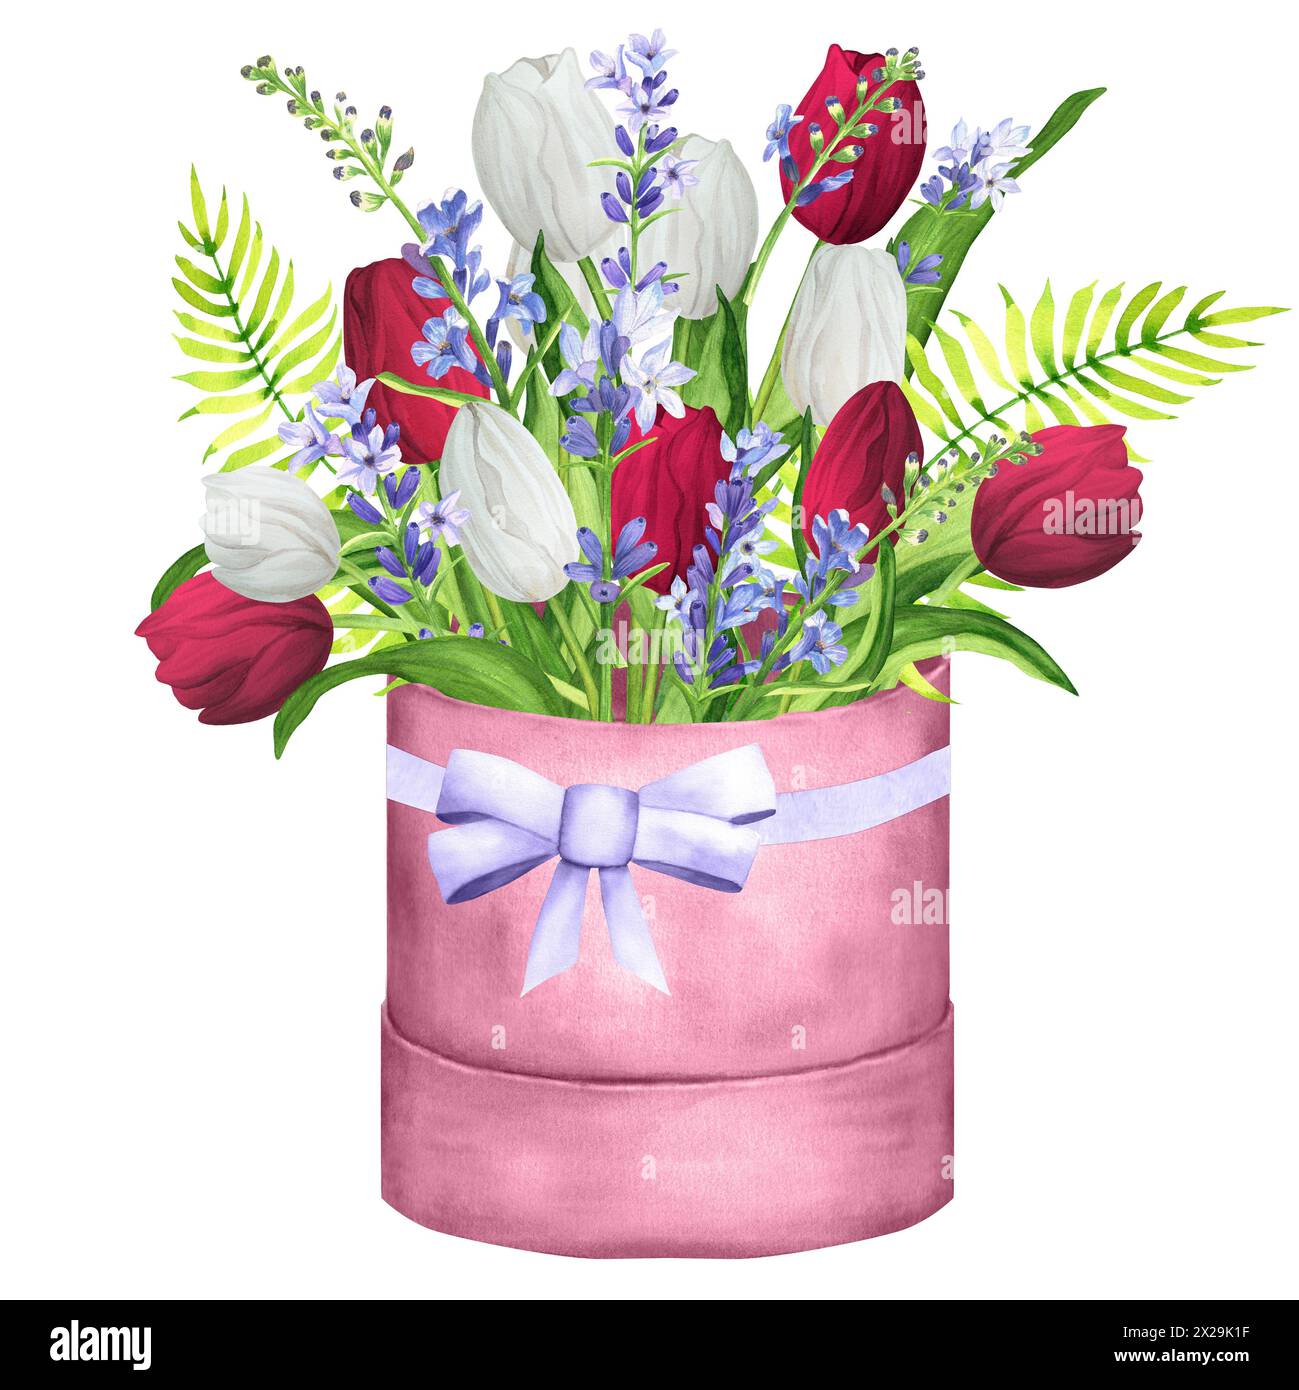 Hand-drawn watercolor illustration. Flower composition with white and red tulips, lavender, fern and green leaves. Spring flowers in the gift box. Bea Stock Photo